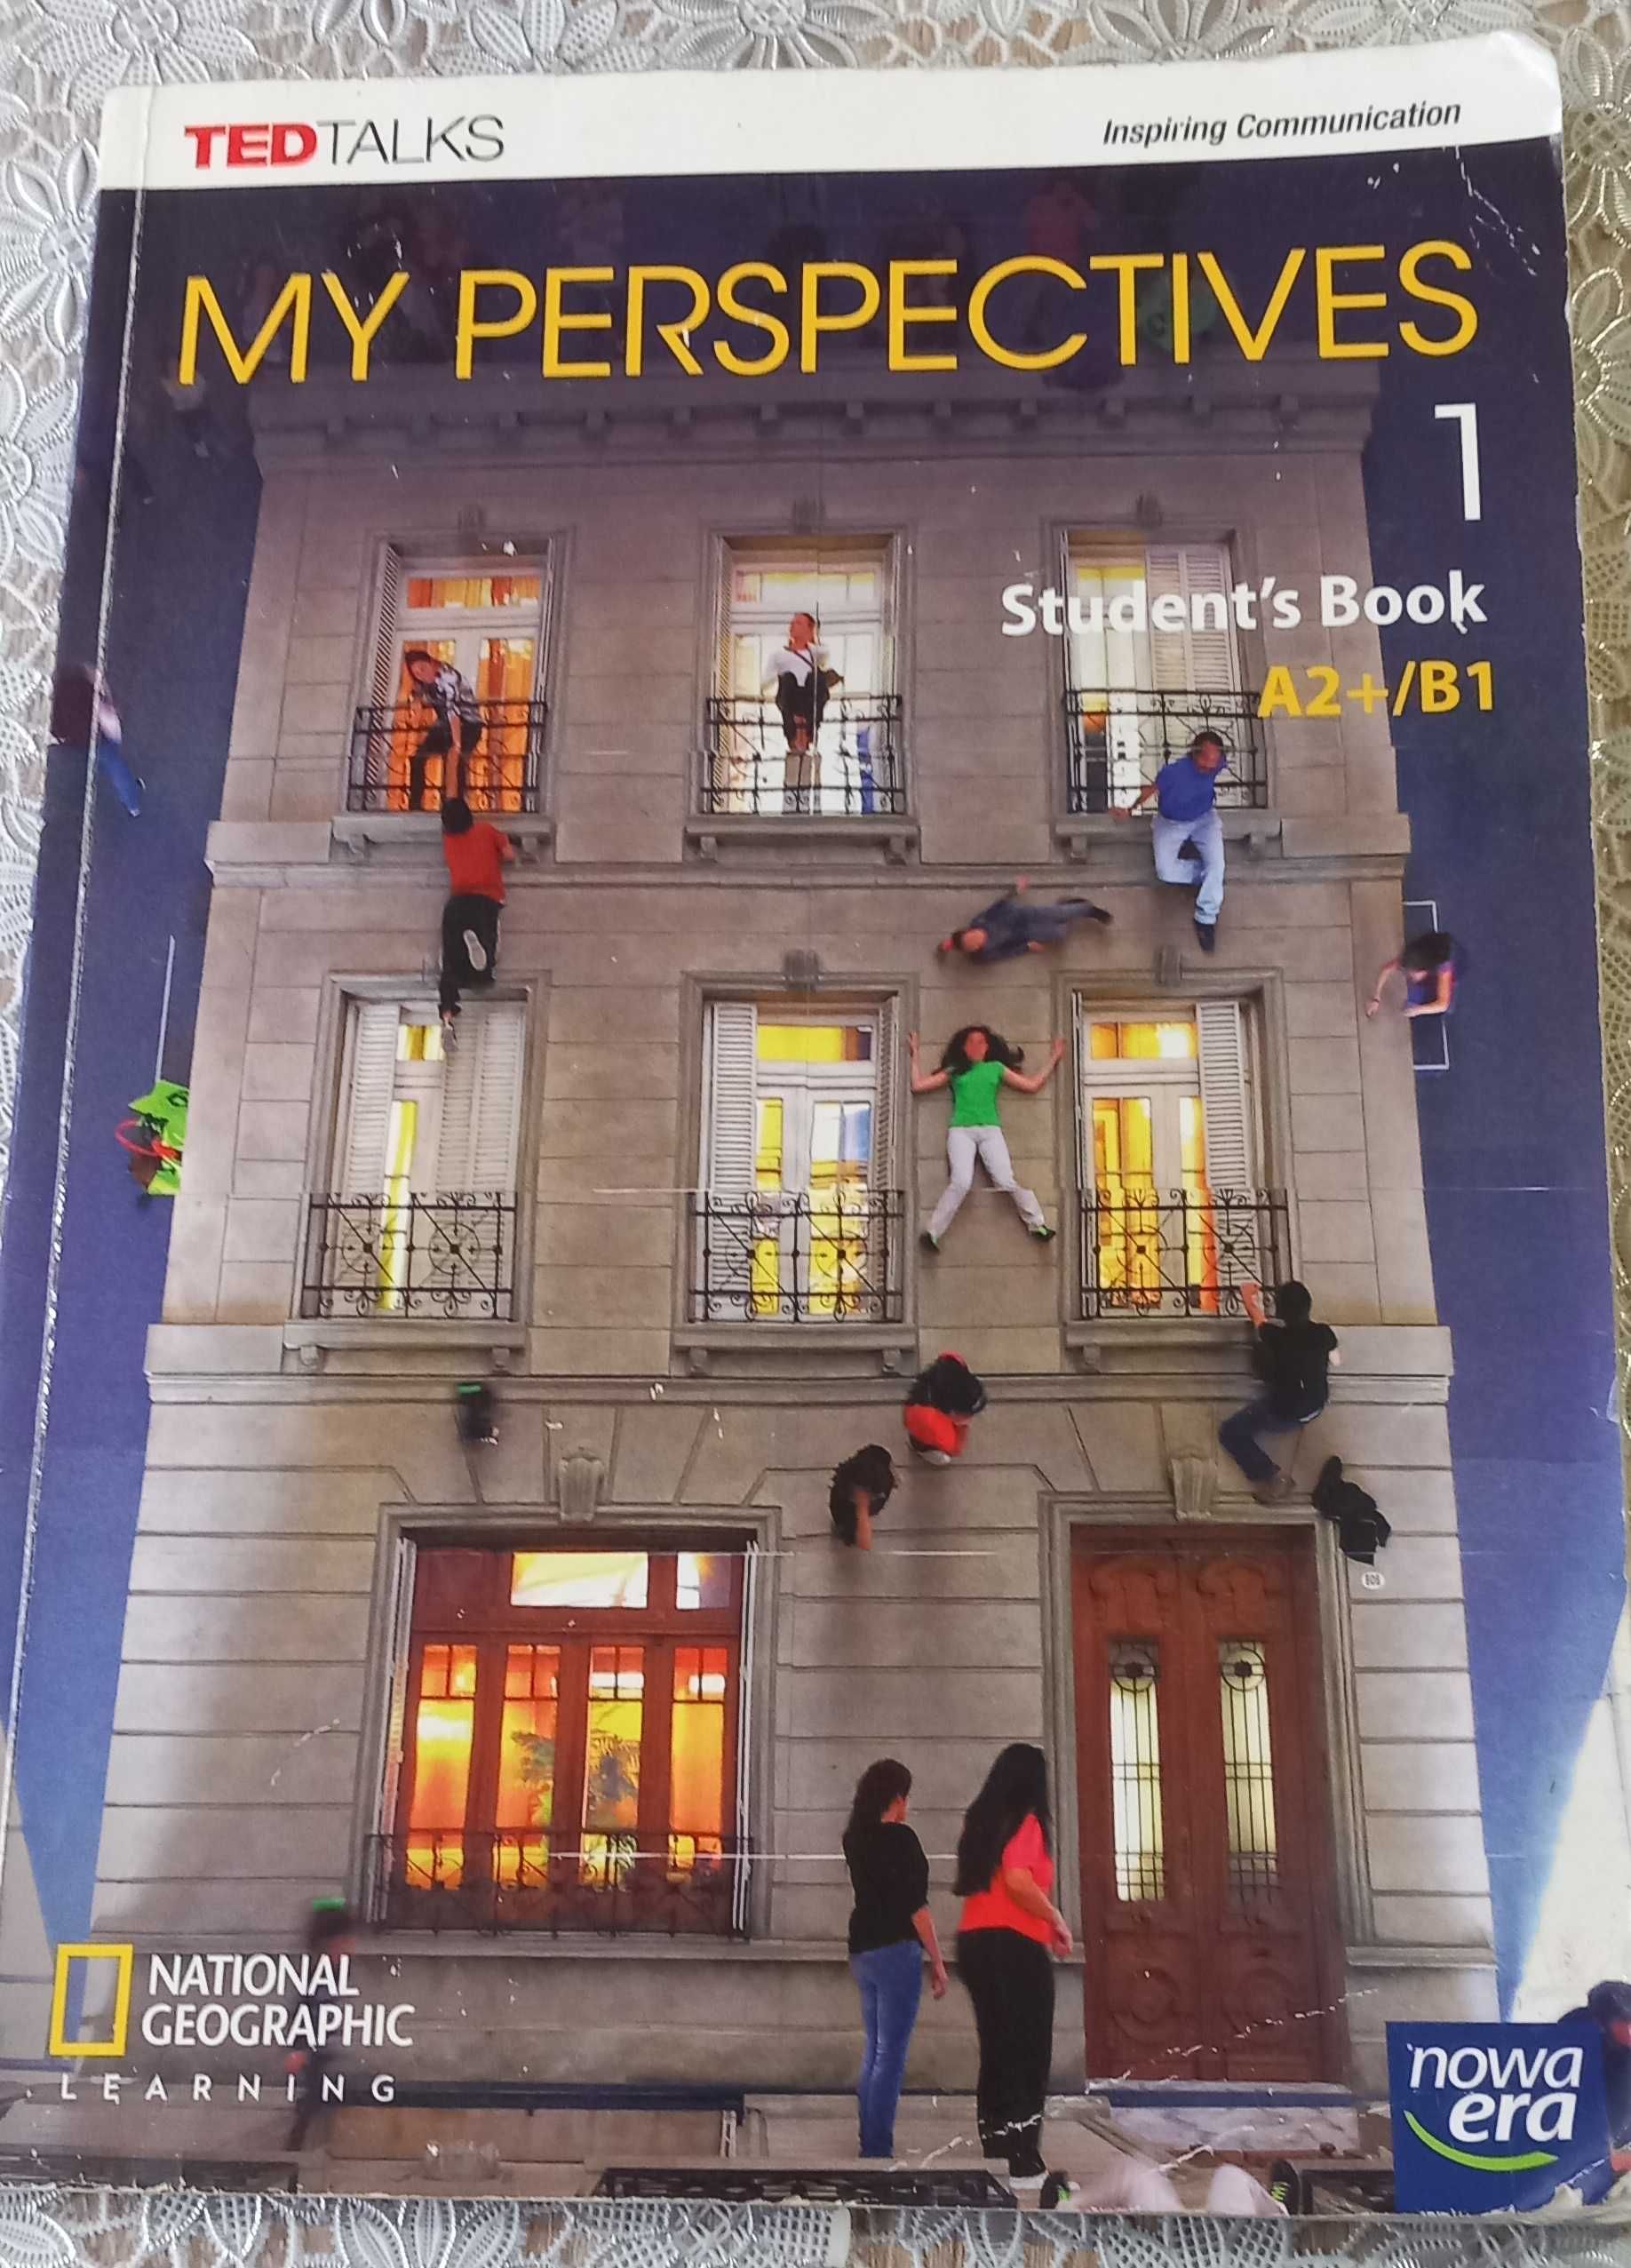 My perspectives 1 Student's Book A2+/B1